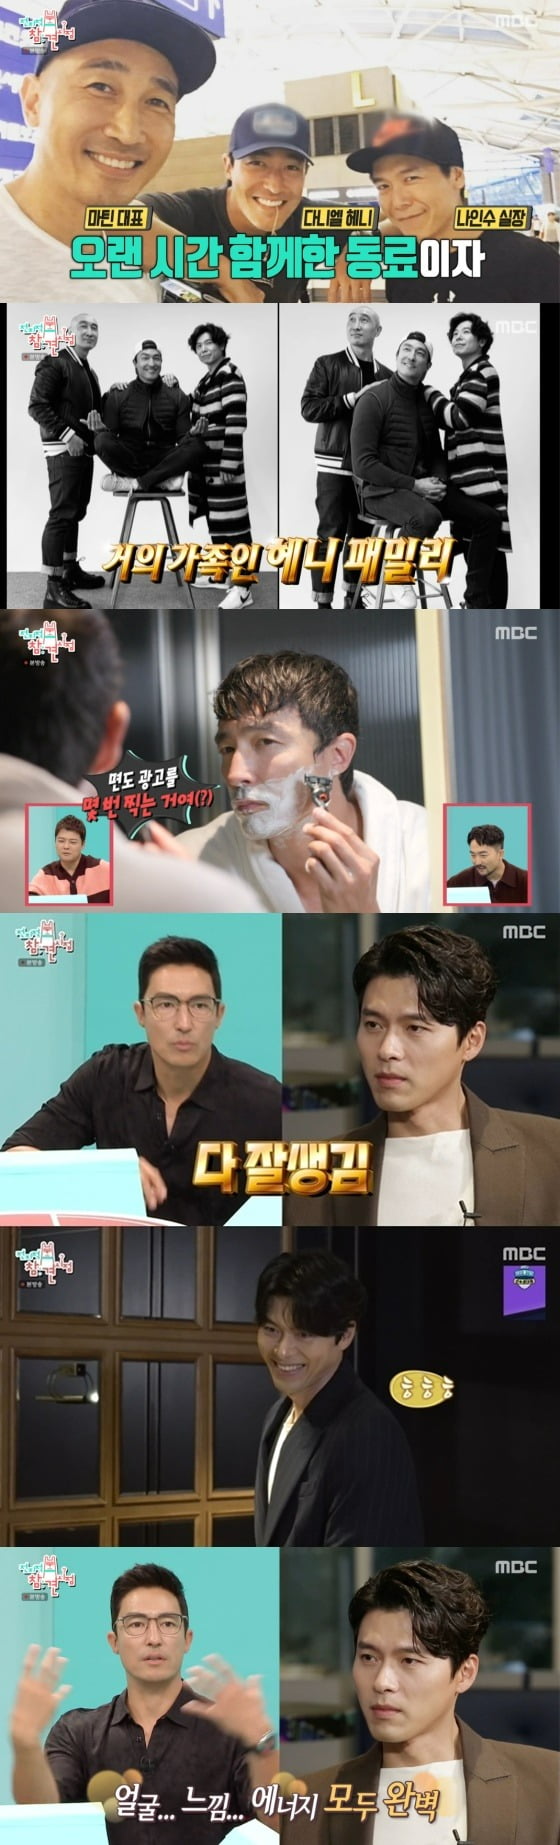 Daniel Henney reveals why he Boycott was in the Hyun Bin Wedding ceremonyIn MBC entertainment Point of Omniscient Interfere (hereinafter referred to as Point of Omniscient Interfere), which was broadcast on the last 10 days, Actor Daniel Henney, who returned to the movie Hyojo 2: International (hereinafter referred to as Hyojo 2), was released.When asked what he had said at the time of the reunion, Daniel Henney, who had been reunited with Hyun Bin in 17 years through Cooperation 2, he said: I just hugged.After shooting, I went to the hotel with Hyun Bin and had a beer and had a lot of old stories. When asked if he was invited to Wedding ceremony with Son Ye-jin, he said, I was invited, but I could not go because I had an American drama shoot.Daniel Henney and the managers routine have been revealed.Martin Scorsese, who said, I have been a manager for 17 years since 2005, said, I was working at the AD agency in 2004 and Daniel had a shot with Jeon Ji-hyun.I knew Daniel there, I was a friend, and I suggested, Can we work like this? So I started to be a manager from then on. Daniel Henney headed to the gym as soon as he got up, and Martin Scorsese and Na In-su arrived at the gym late.Daniel Henney showed up coaching the two peoples workouts, and Martin Scorsese said in an interview with the production team, Daniel turns around when he starts working out.This Friend has a PT certificate, and he wants to make us a workout bug, and we can not keep up with it, he said.At the dinner after the exercise, Daniel Henney said he was producing a documentary about his dog.Martin Scorsese said, A few years ago, a dog mango crossed a rainbow bridge and raised a puppy called Roscoe and Juliet.Its a documentary about a puppy and Daniel, the Friends were adopted in Korea and its all about it, he said.Daniel Henney, who arrived at the press preview of Cooperation 2, met with Hyun Bin, and Hyun Bin hugged Daniel Henney as soon as he saw him.Daniel Henney said he was handsome towards Hyun Bin as soon as he sat down.Asked at the studio if  (Hyun Bin) is better-looking than himself, Daniel Henney said, Of course, adding: Face, Feelings, energy, all are perfect.There are Feelings like a leader, he said.Hyun Bin also asked for his regards to Martin Scorsese, and Martin Scorsese said, Thanks to my wife, I am well.After going to the Wedding ceremony of the Son Ye-jin couple, Hyun Bin, he smiled.